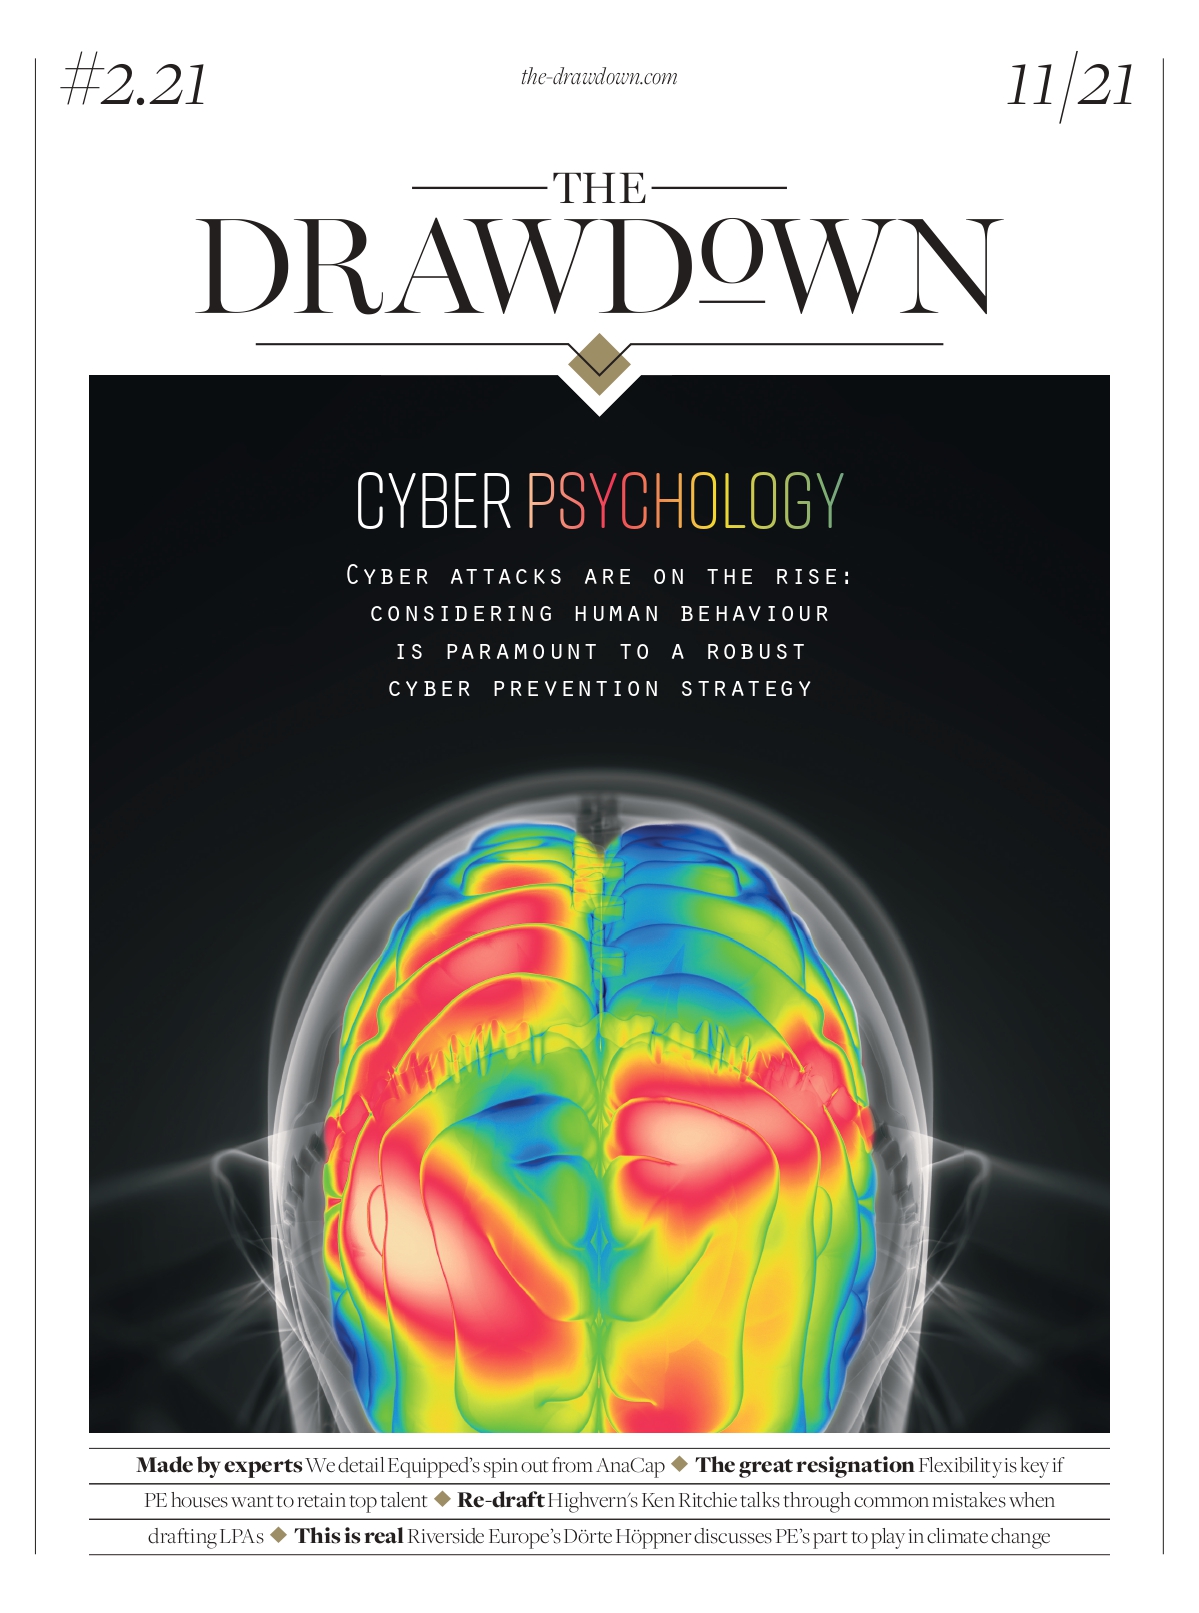 The Drawdown Issue November 2021 Cover